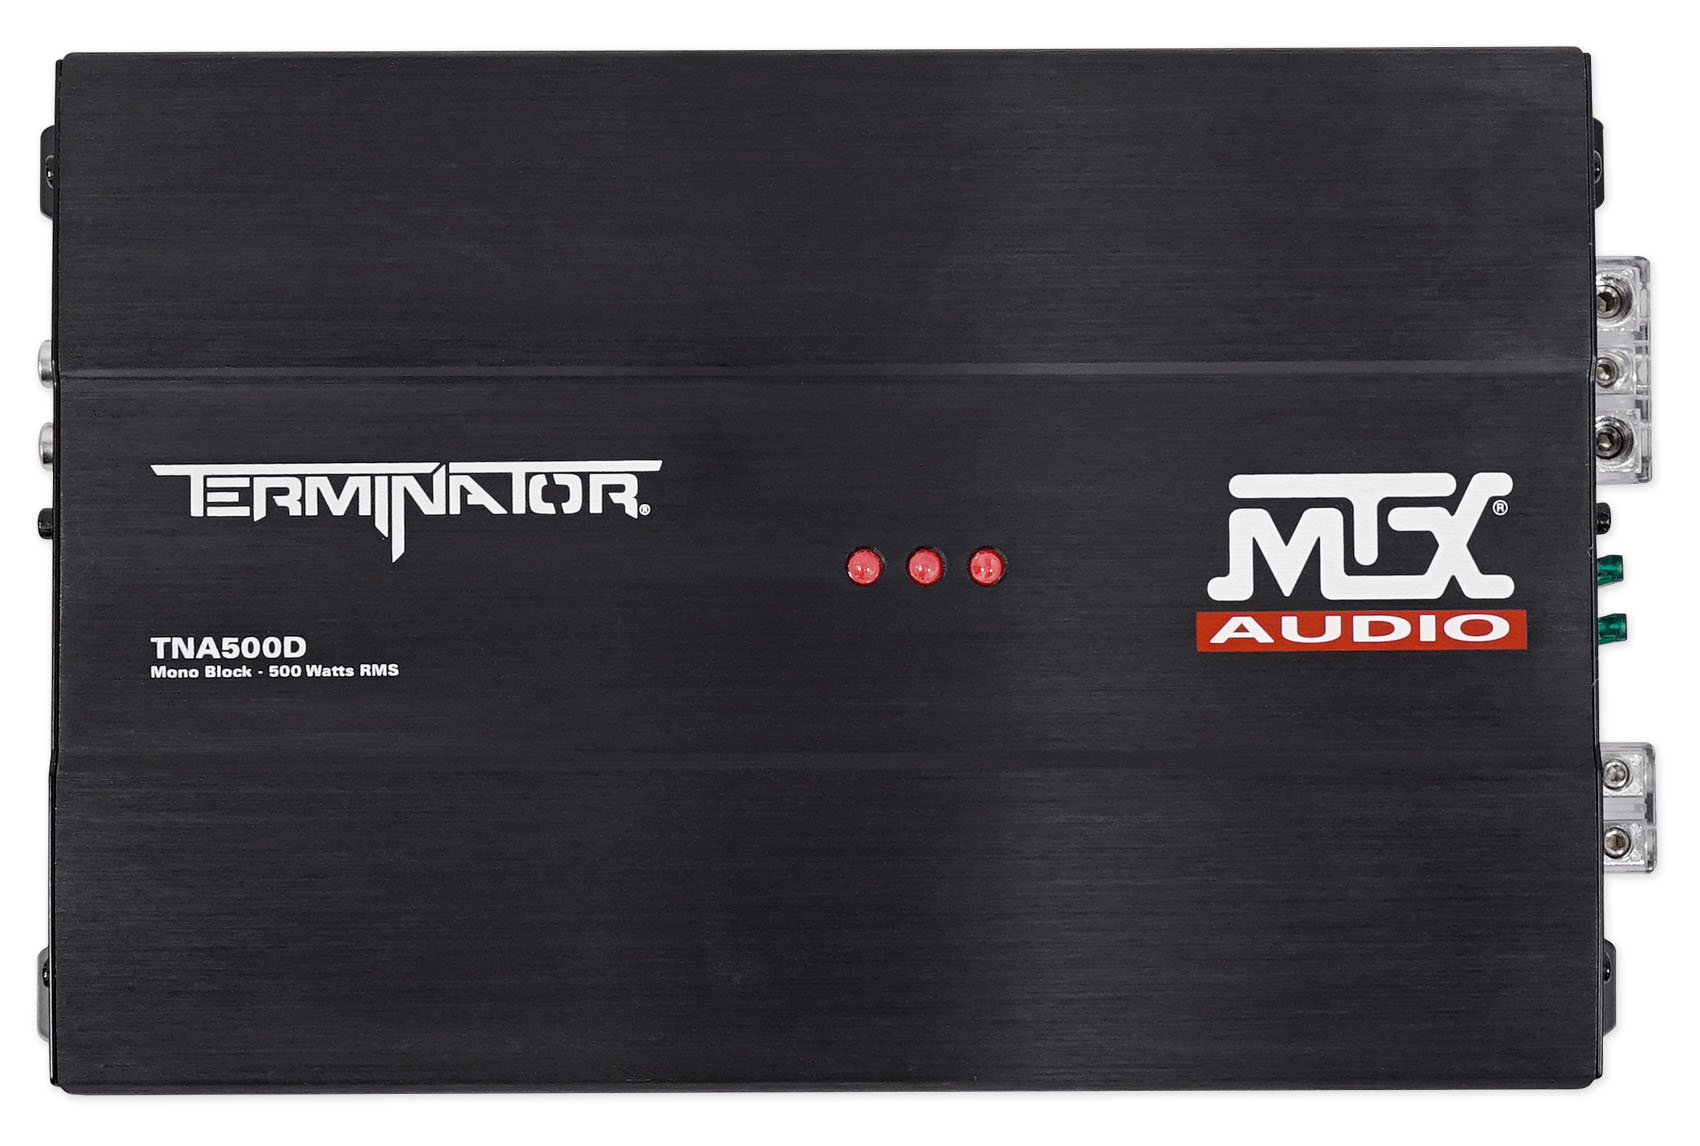 MTX TNP212DV 12in 2000W Dual Loaded Subwoofer Enclosure with Amplifier, New - image 5 of 10